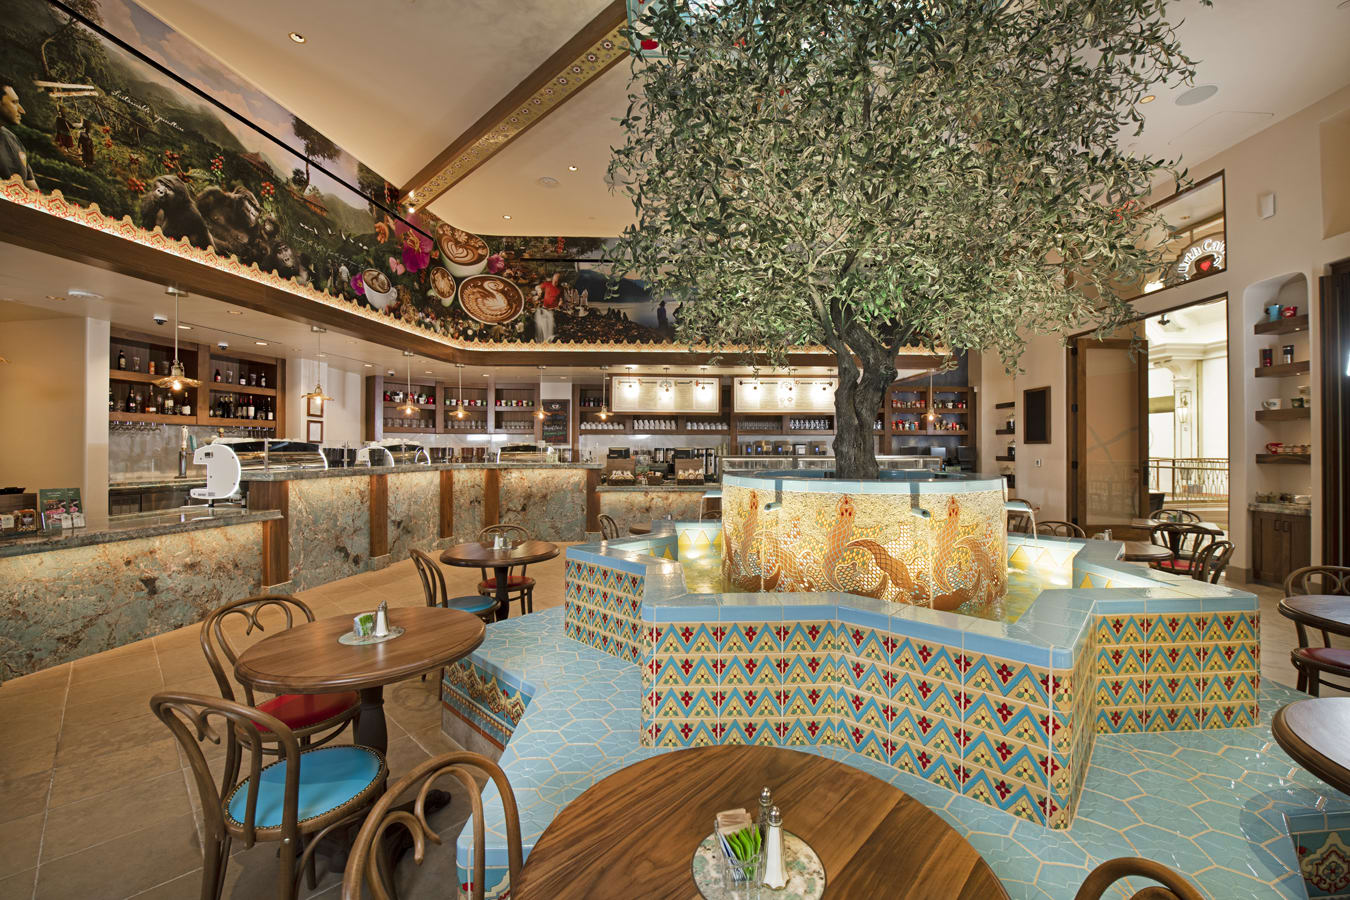 Fabricated Mediterranean Olive Tree and surroundings at Las Vegas Cafe